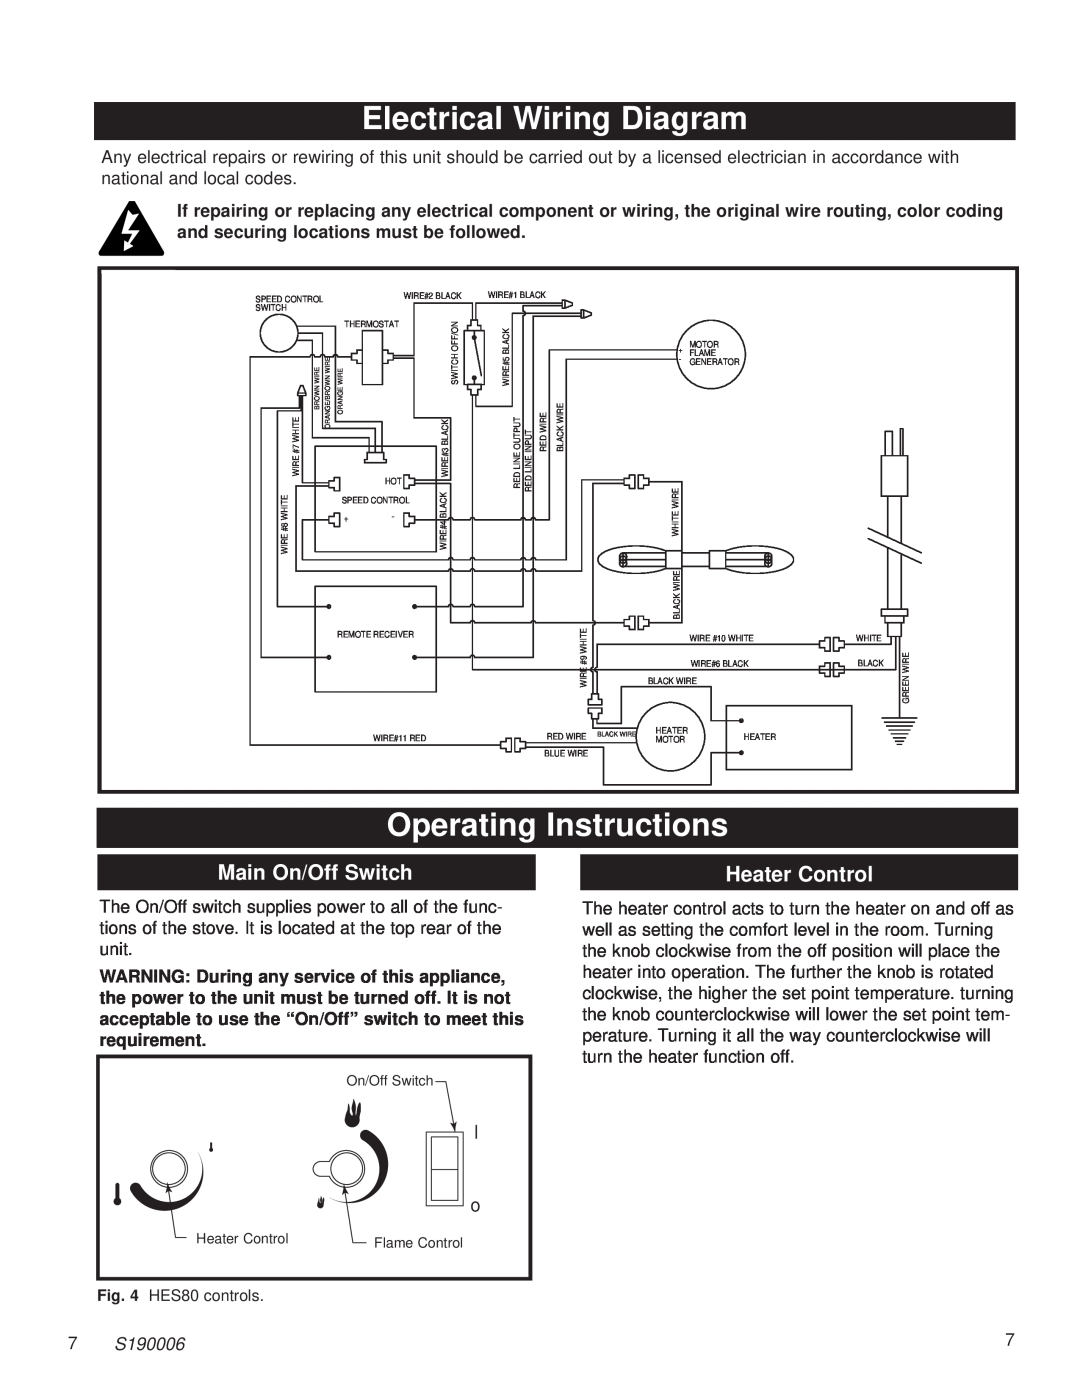 Century HES80 Electrical Wiring Diagram, Operating Instructions, Main On/Off Switch, Heater Control, S190006 